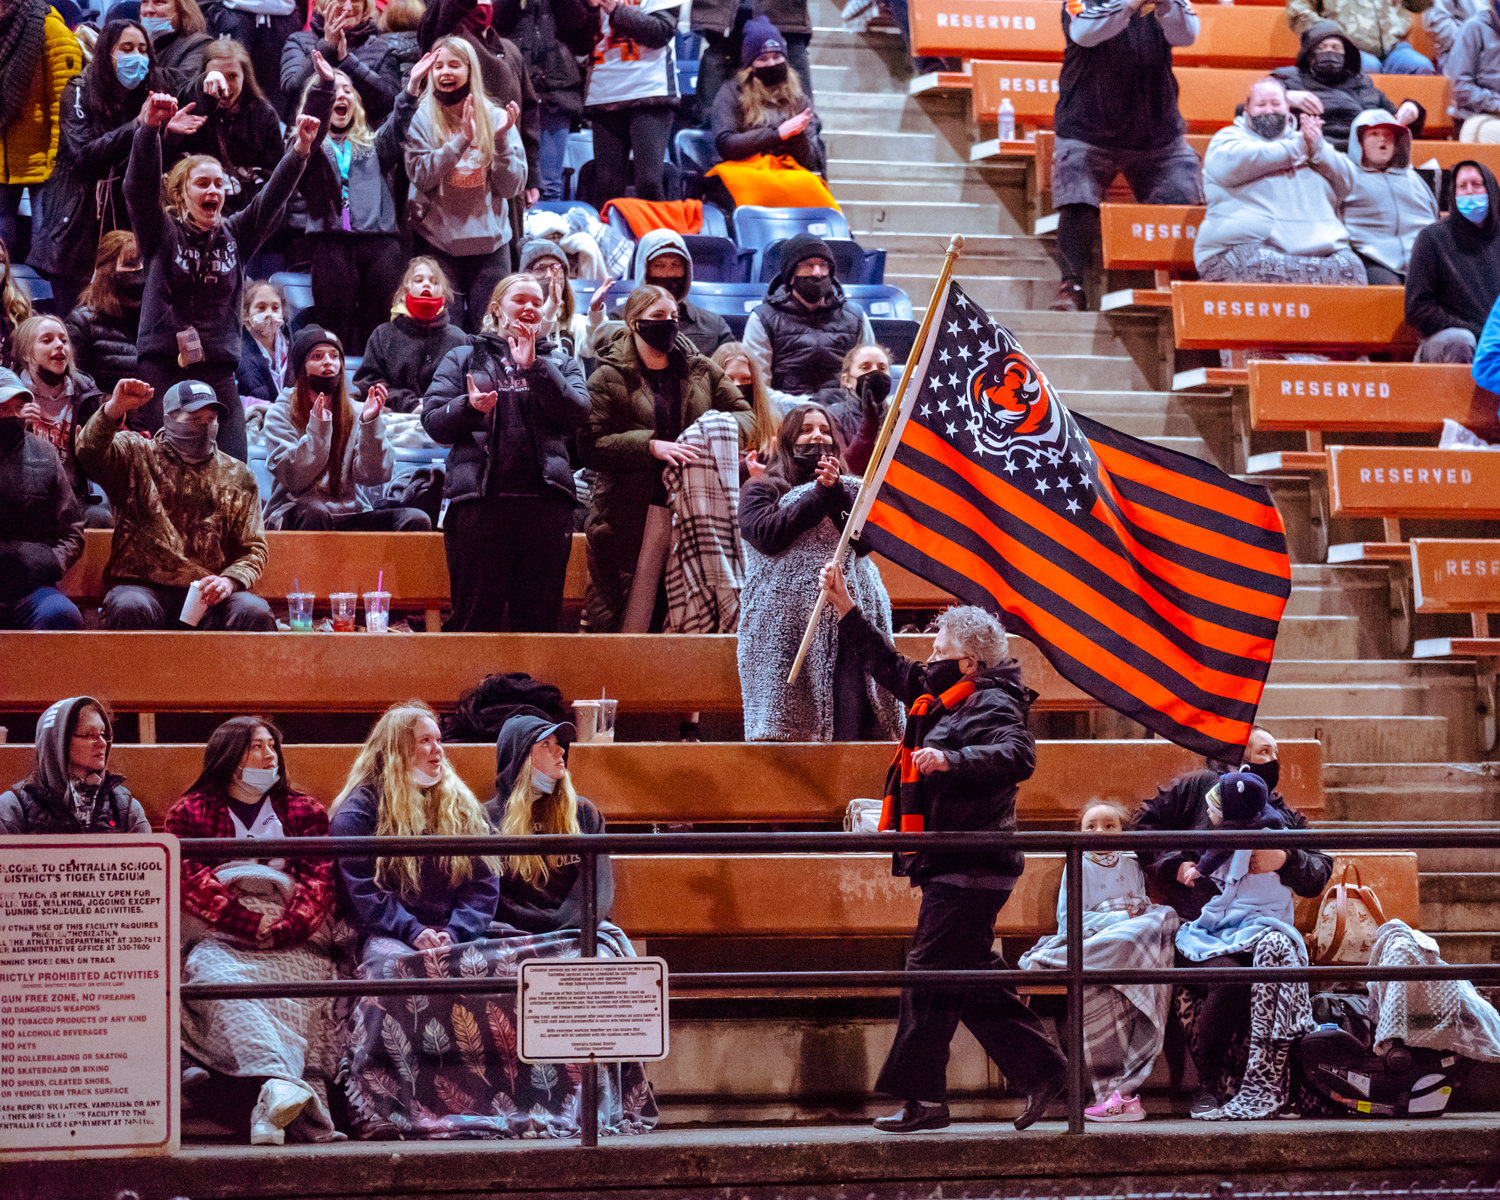 A flag is waved by Napavine fans during a game Saturday night at Tiger Stadium.